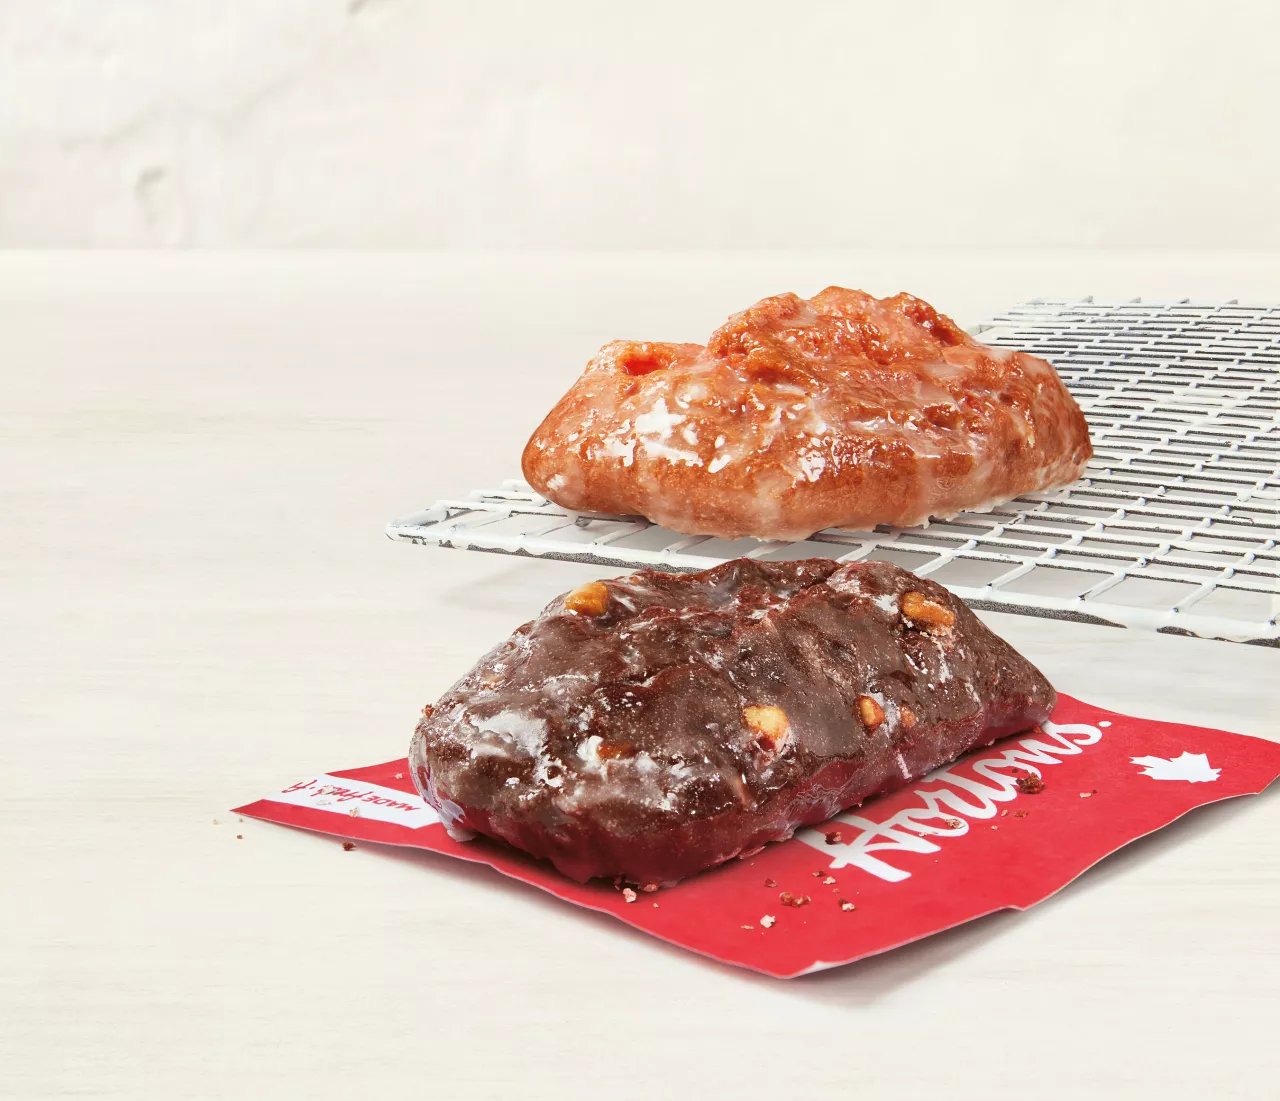 Tim Hortons is bringing back the beloved Walnut Crunch and Cherry Stick donuts for a limited time to celebrate National Donut Day!